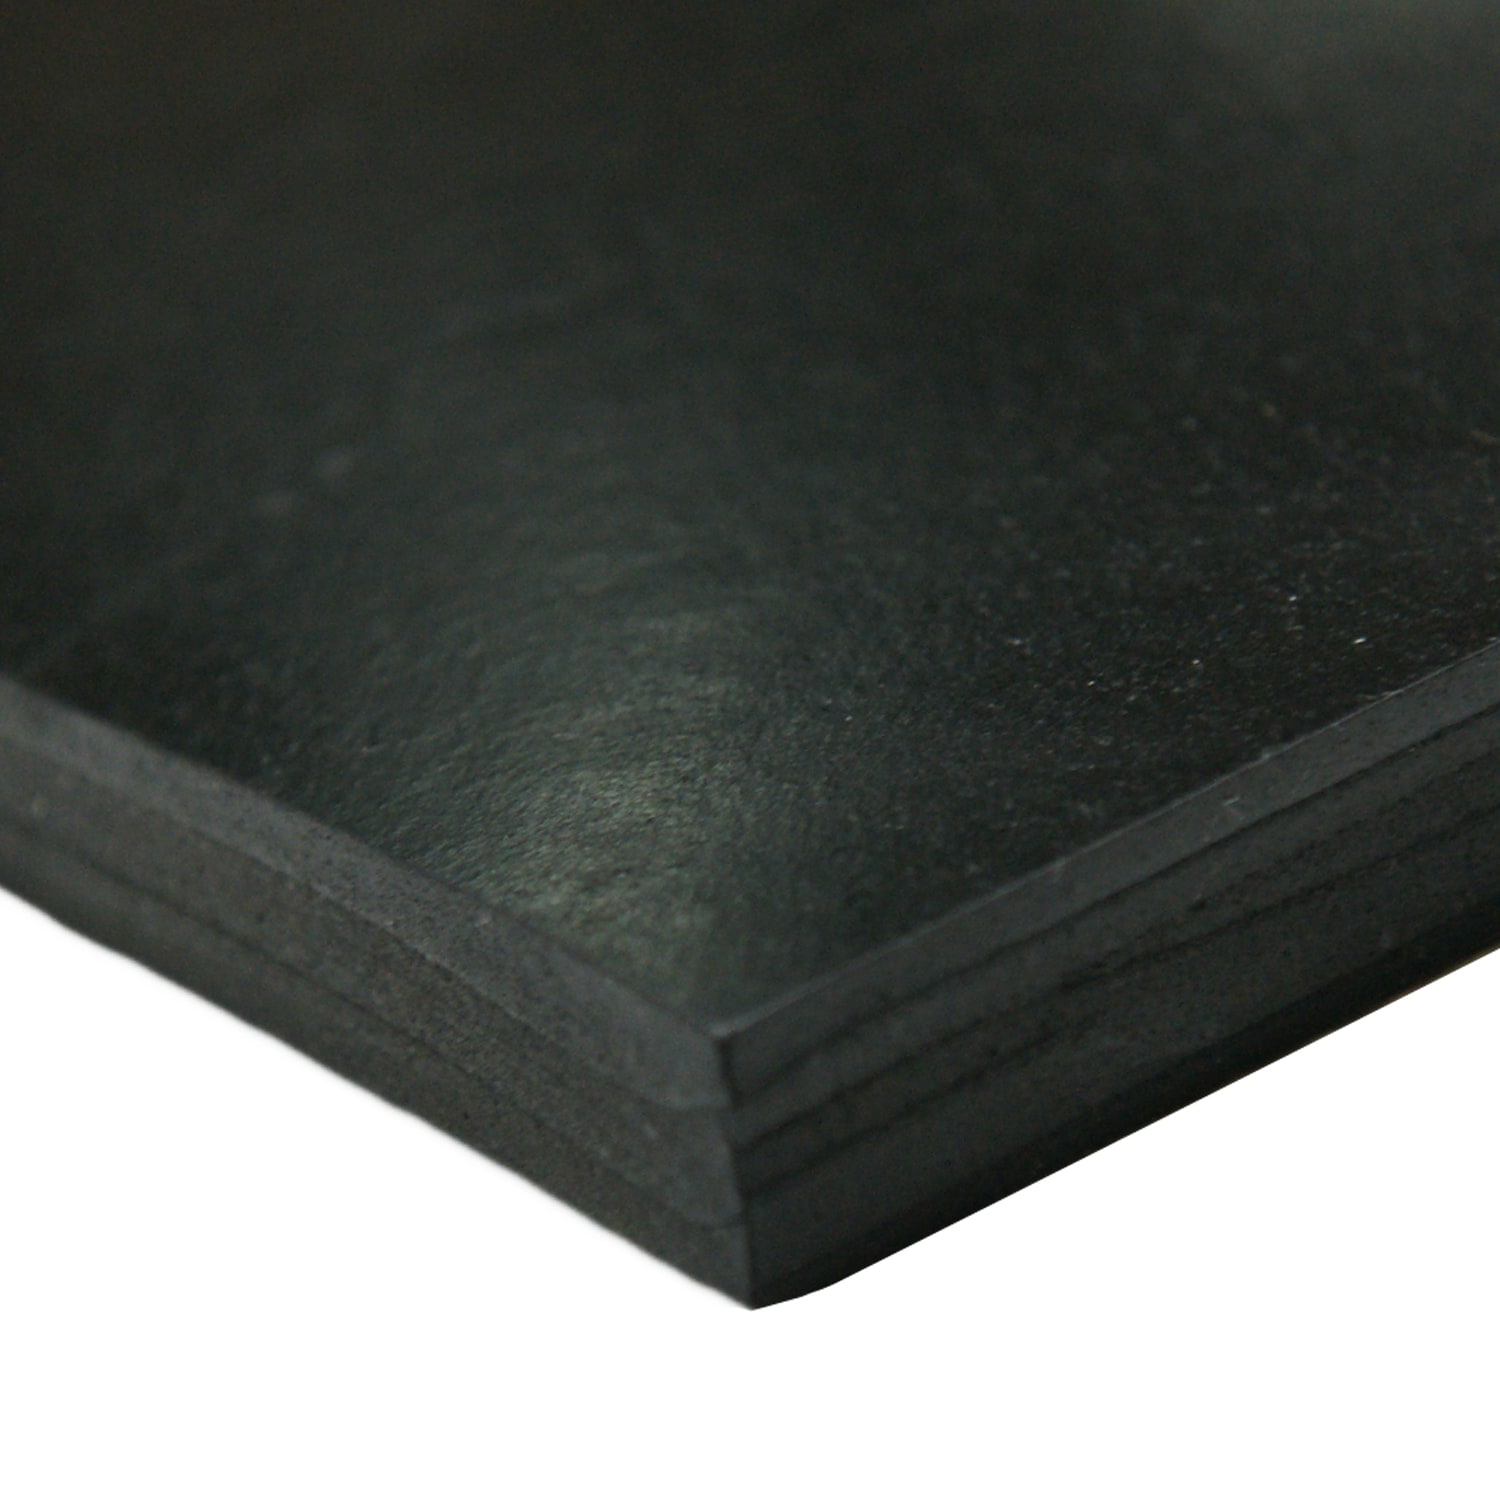 Closed Cell Rubber - Blend